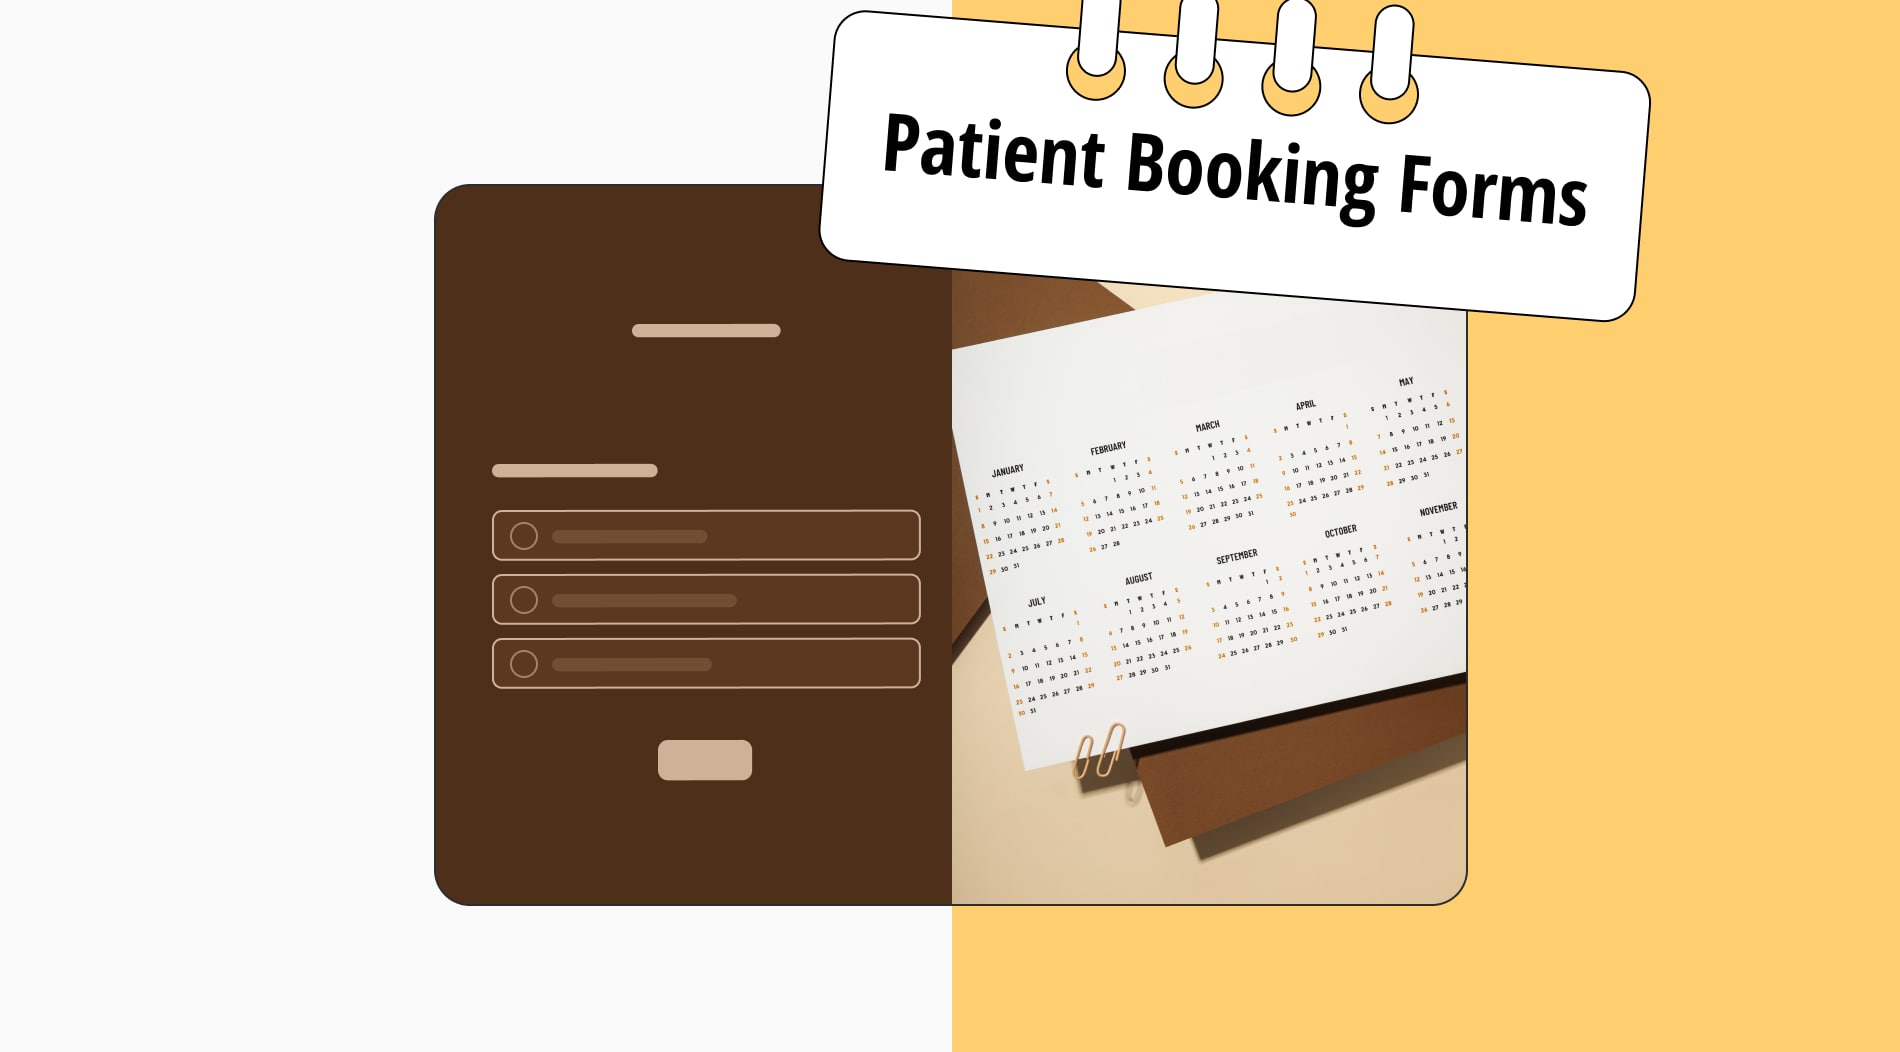 Patient booking forms: Definition, questions & how to create